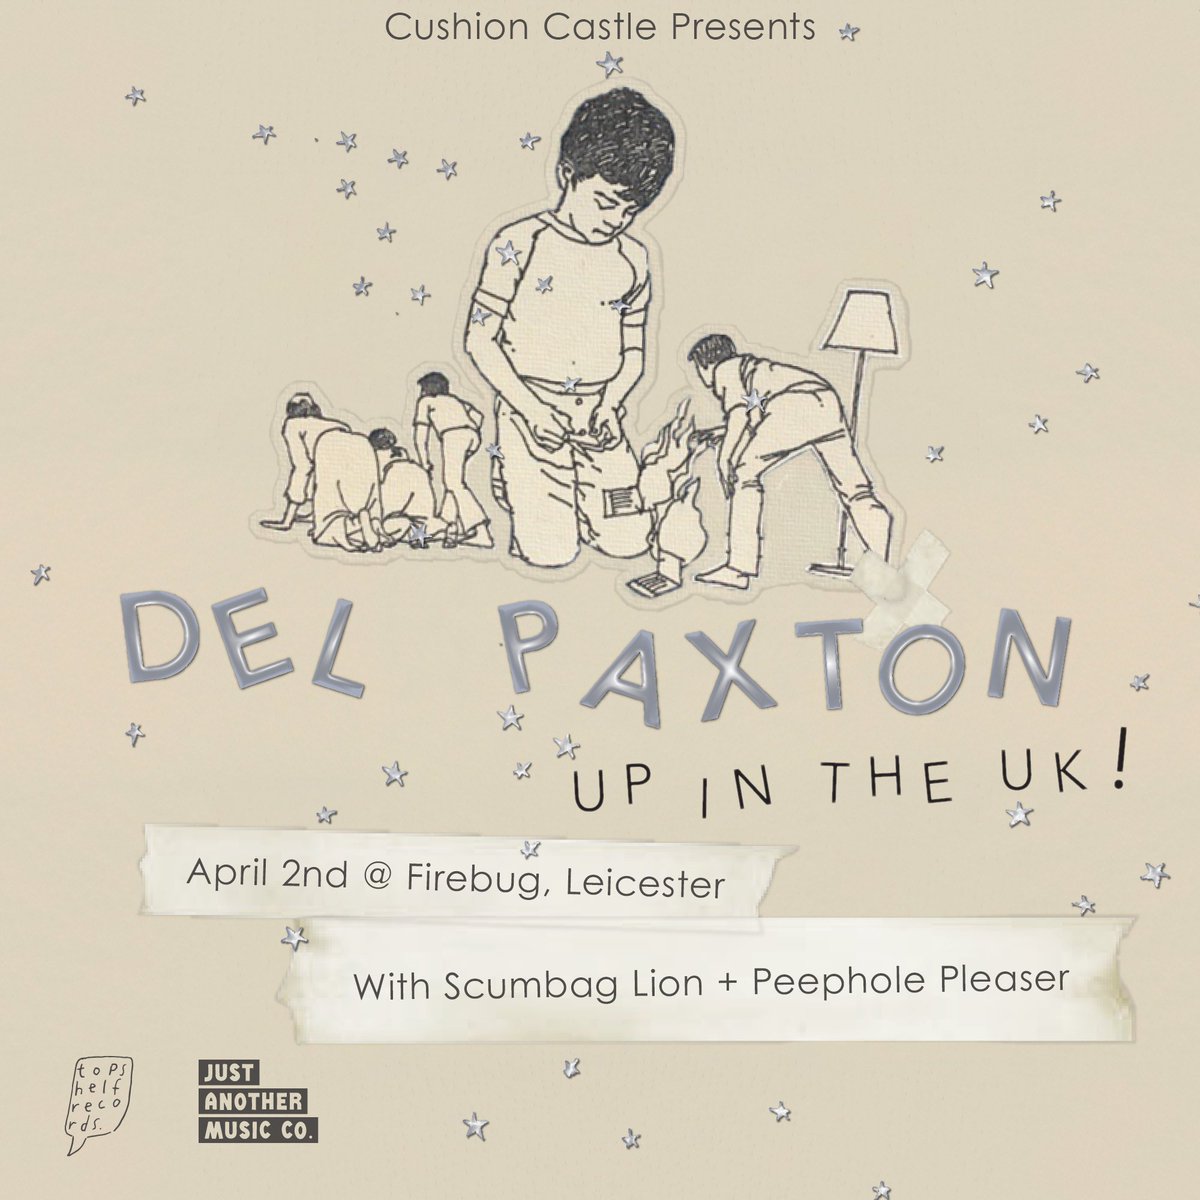 Today’s the day! Buffalo NY legends @delpaxtonbflo, supported by Scumbag Lion and Peephole Pleaser at @FirebugBar Advance tickets are up til 3pm, then it’s £10 on the door!